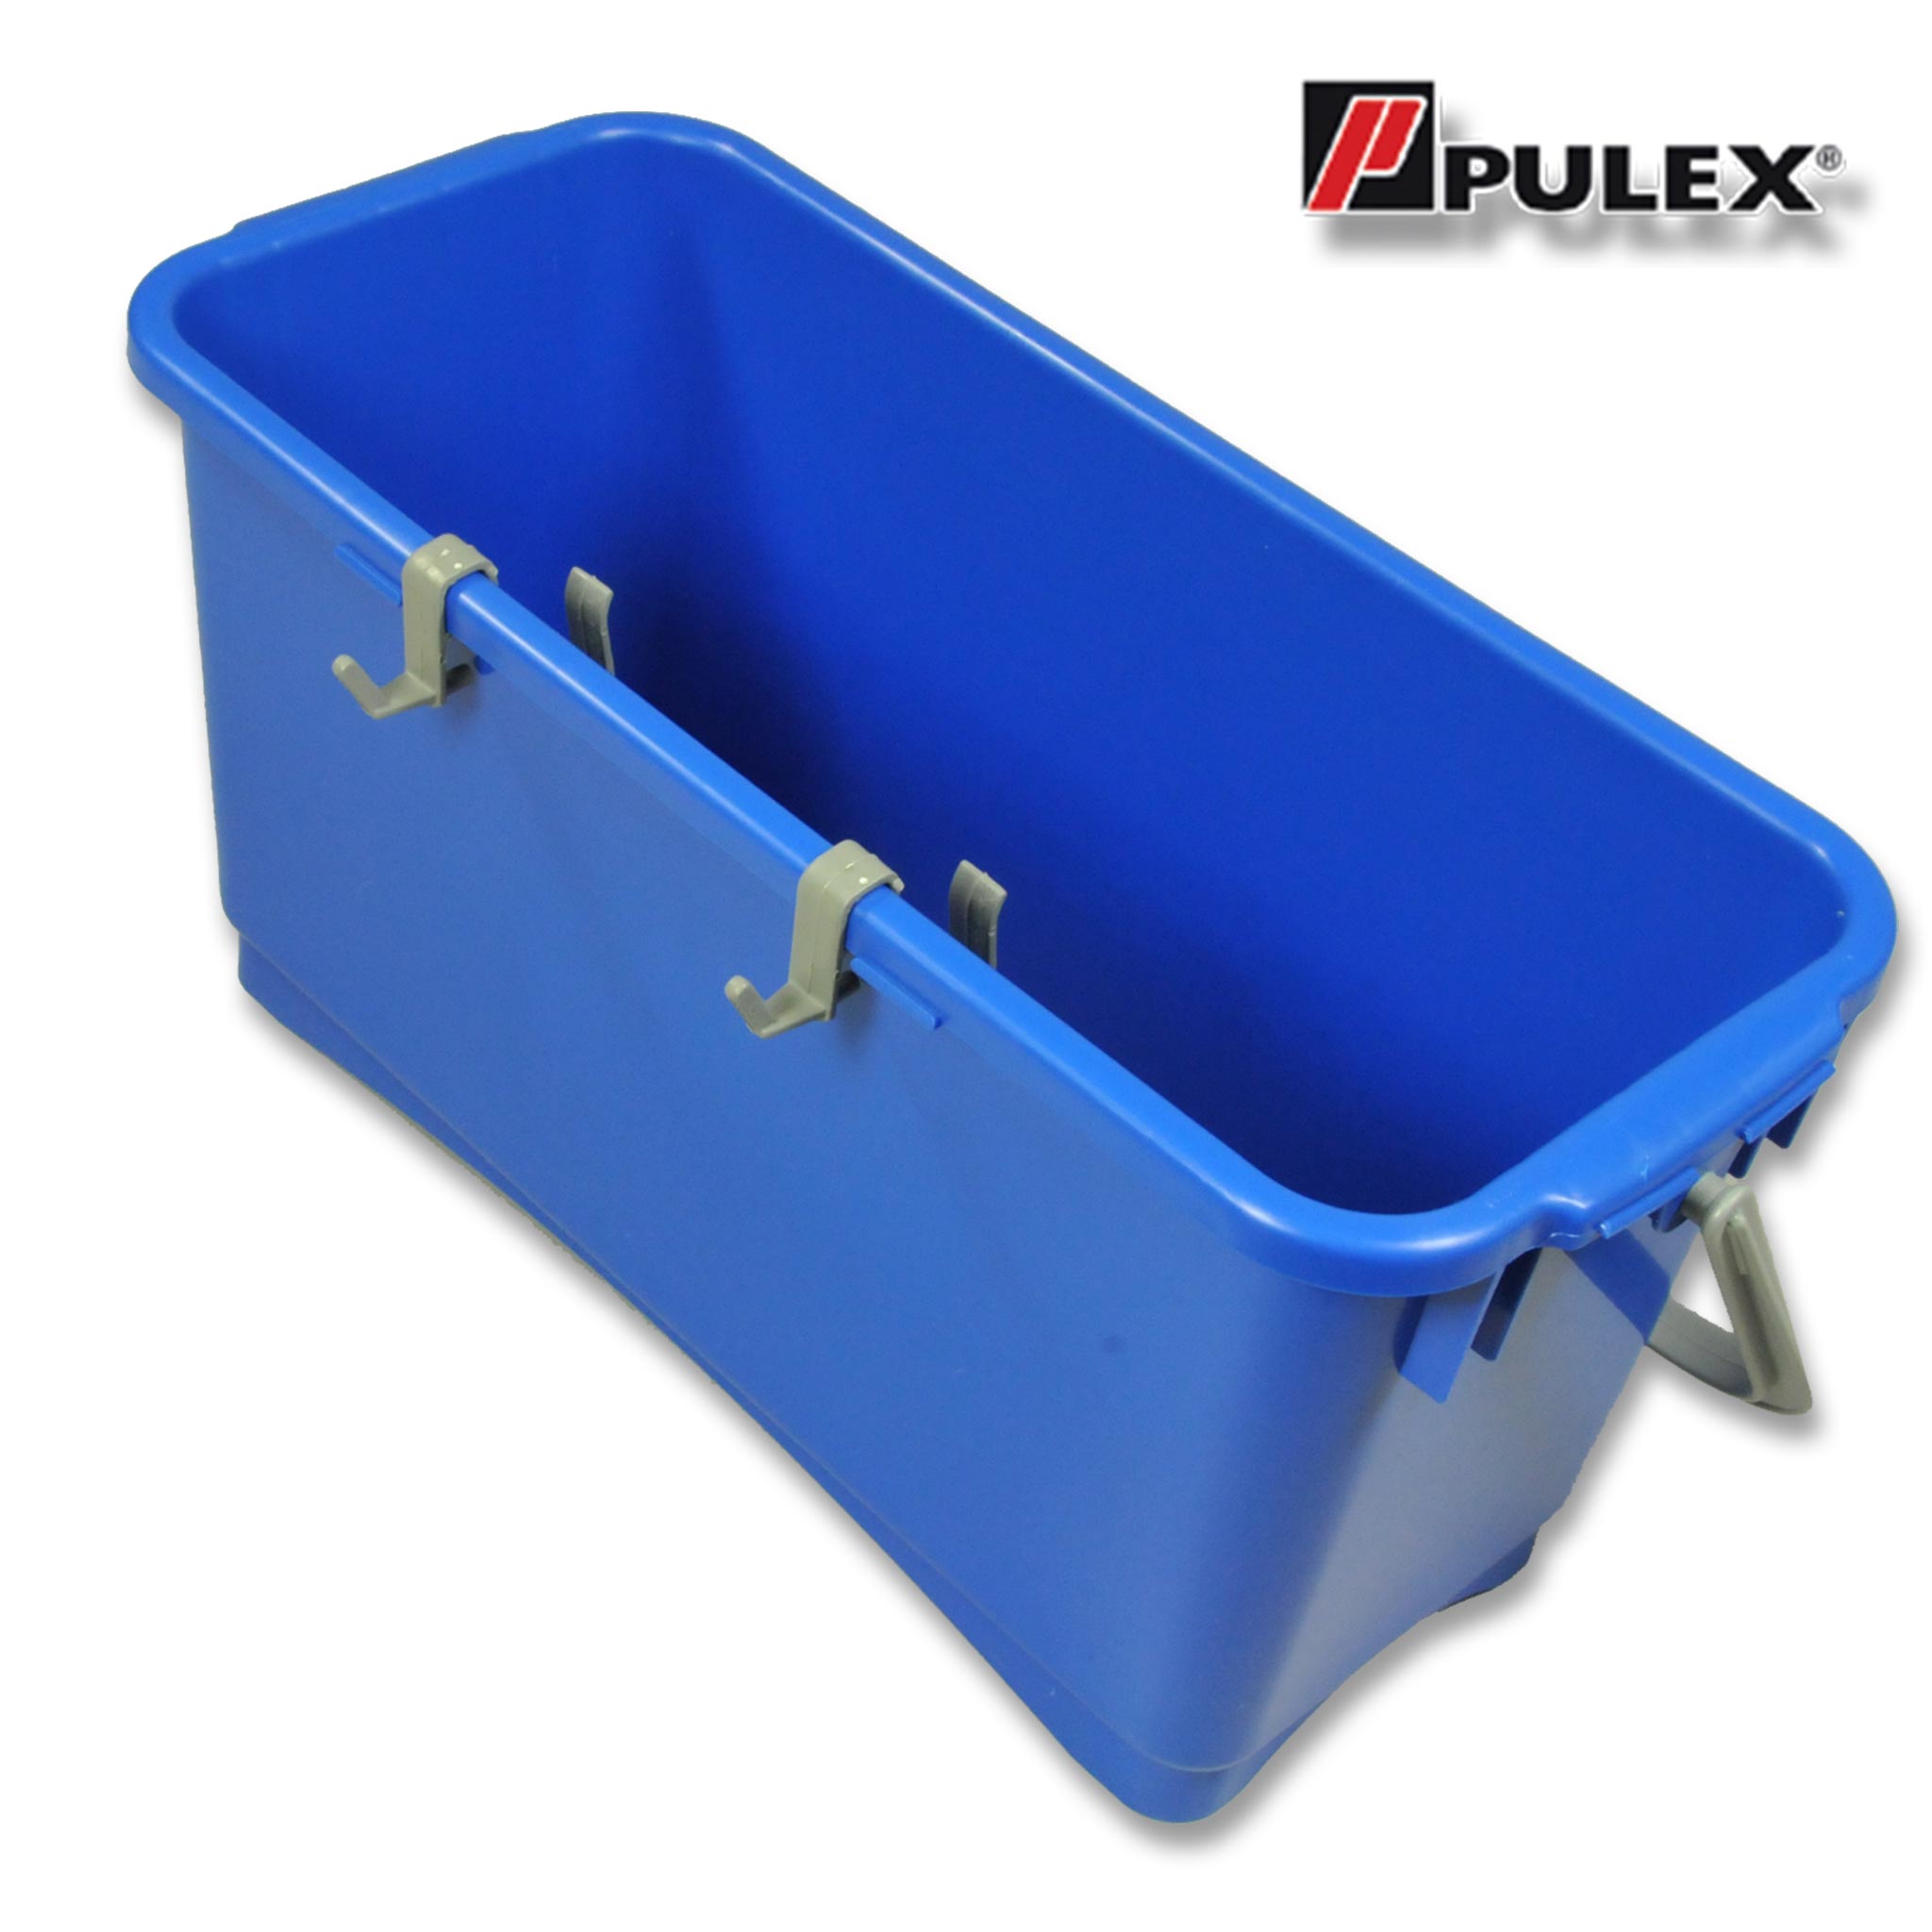 Pulex Squeegee and Applicator Hangers